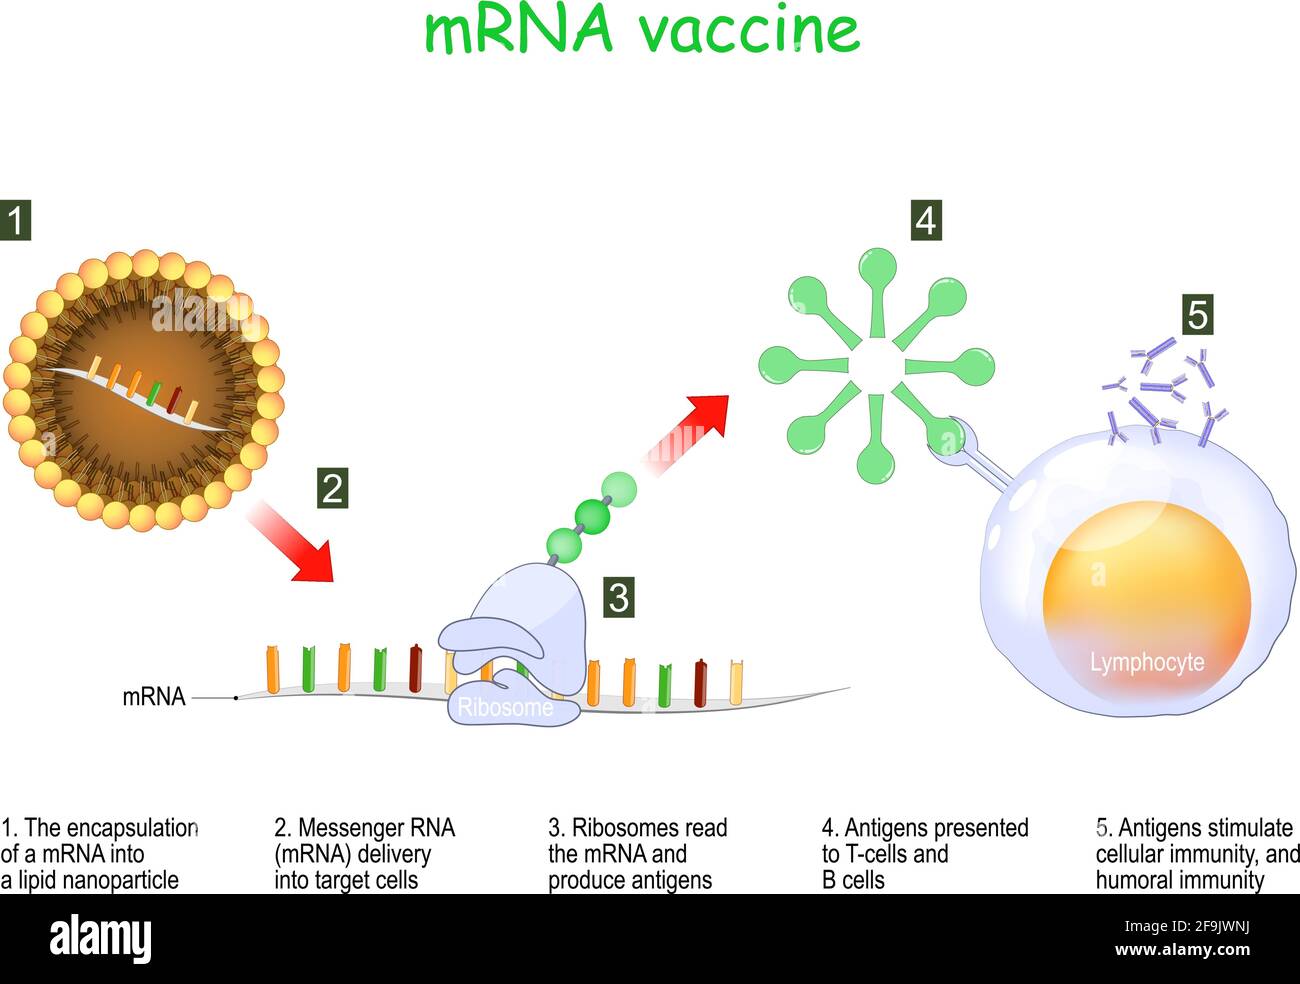 mRNA vaccine. The encapsulation of a Messenger RNA into a lipid nanoparticle and delivery into target cells. Ribosomes read the mRNA and produce antig Stock Vector